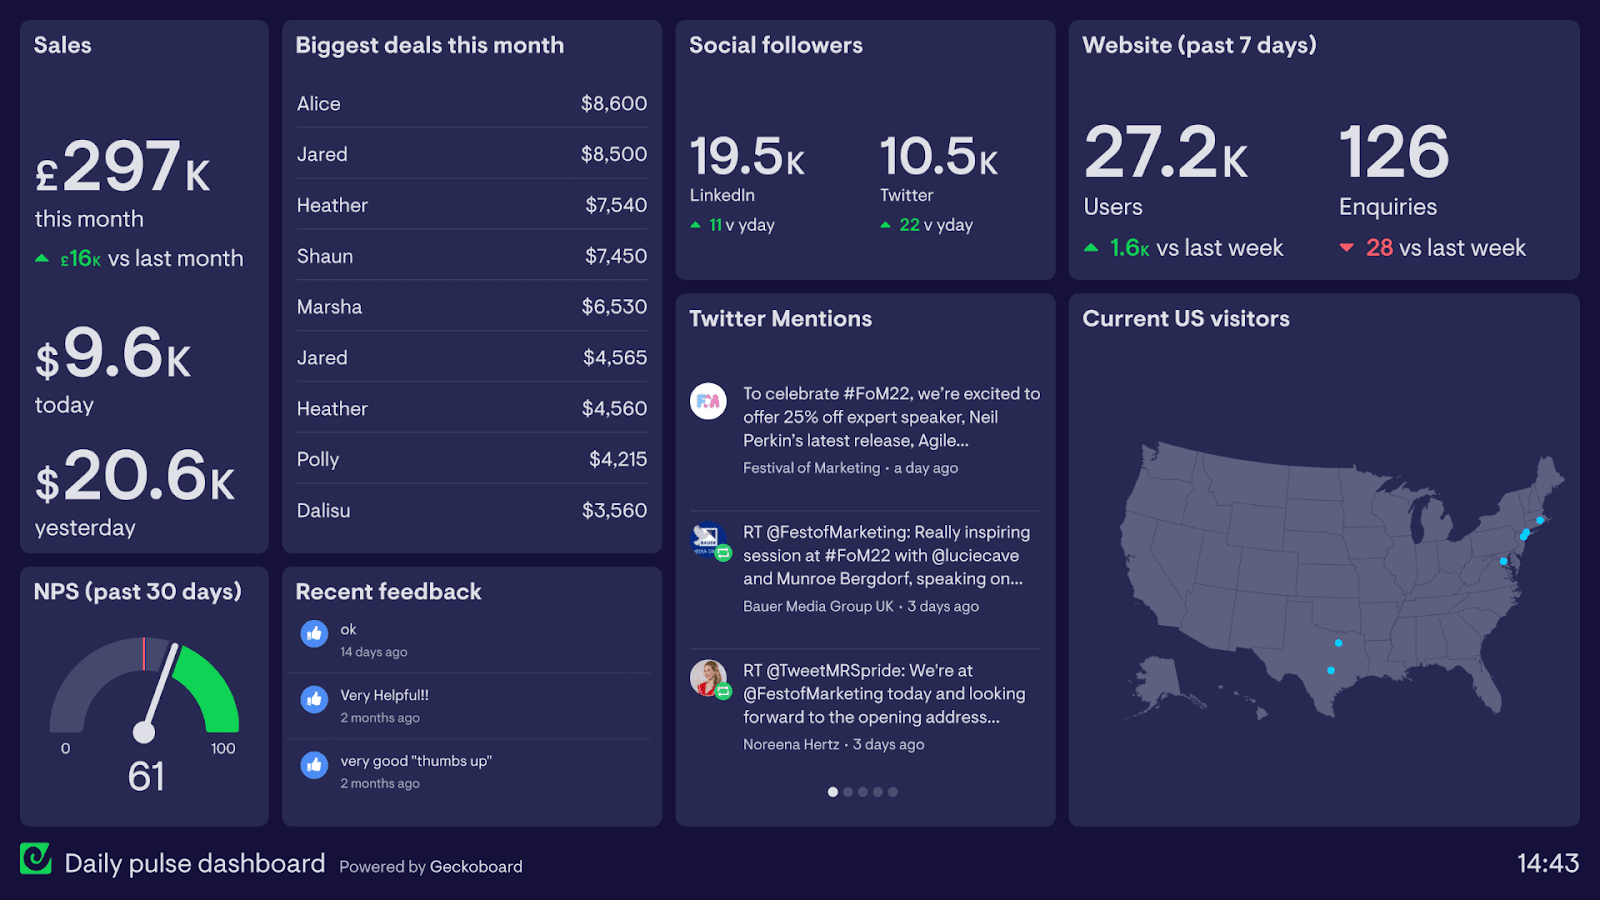 Example of a SaaS dashboard